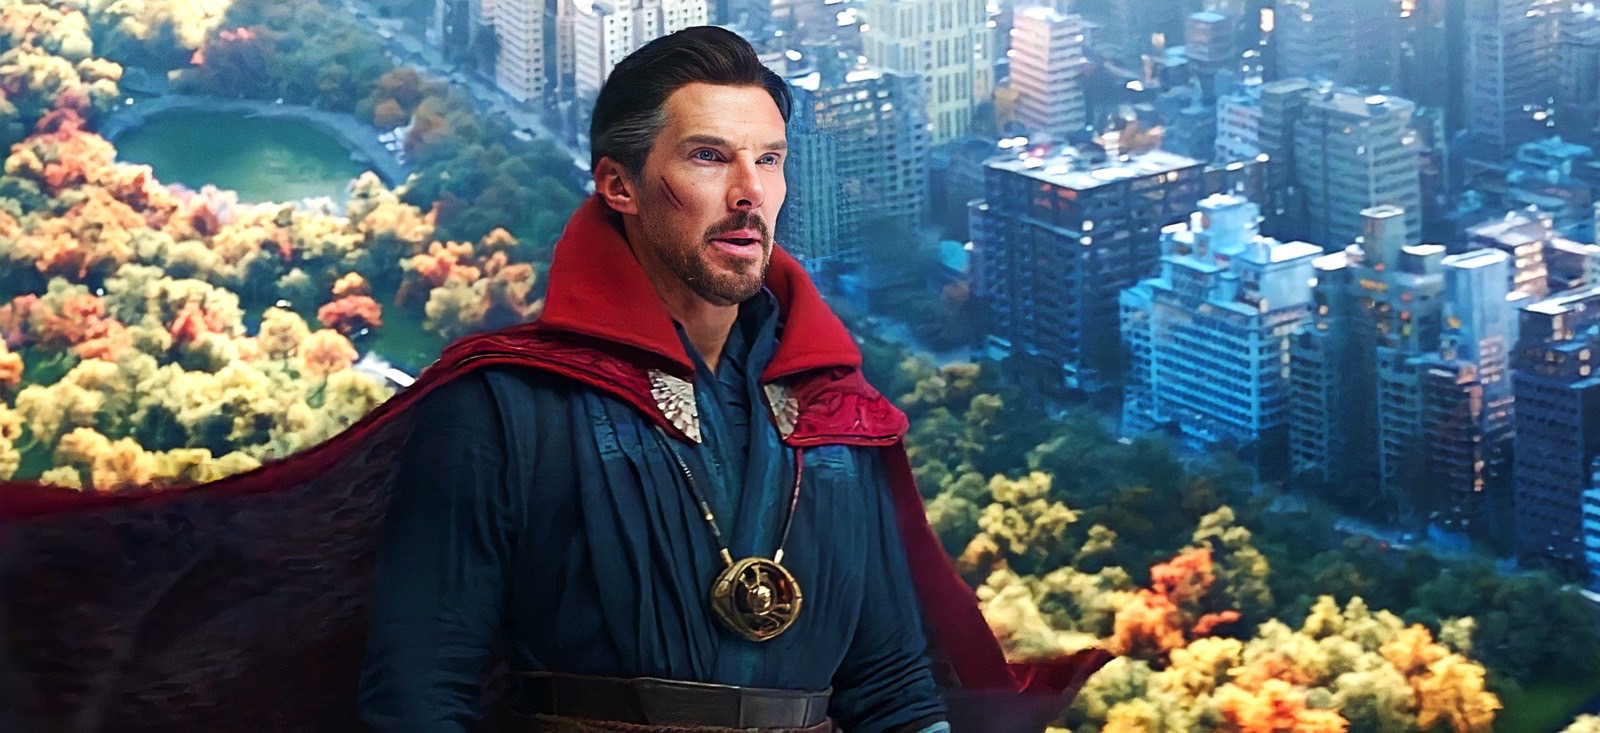 Marvel fans will love this Doctor Strange 2 appearance